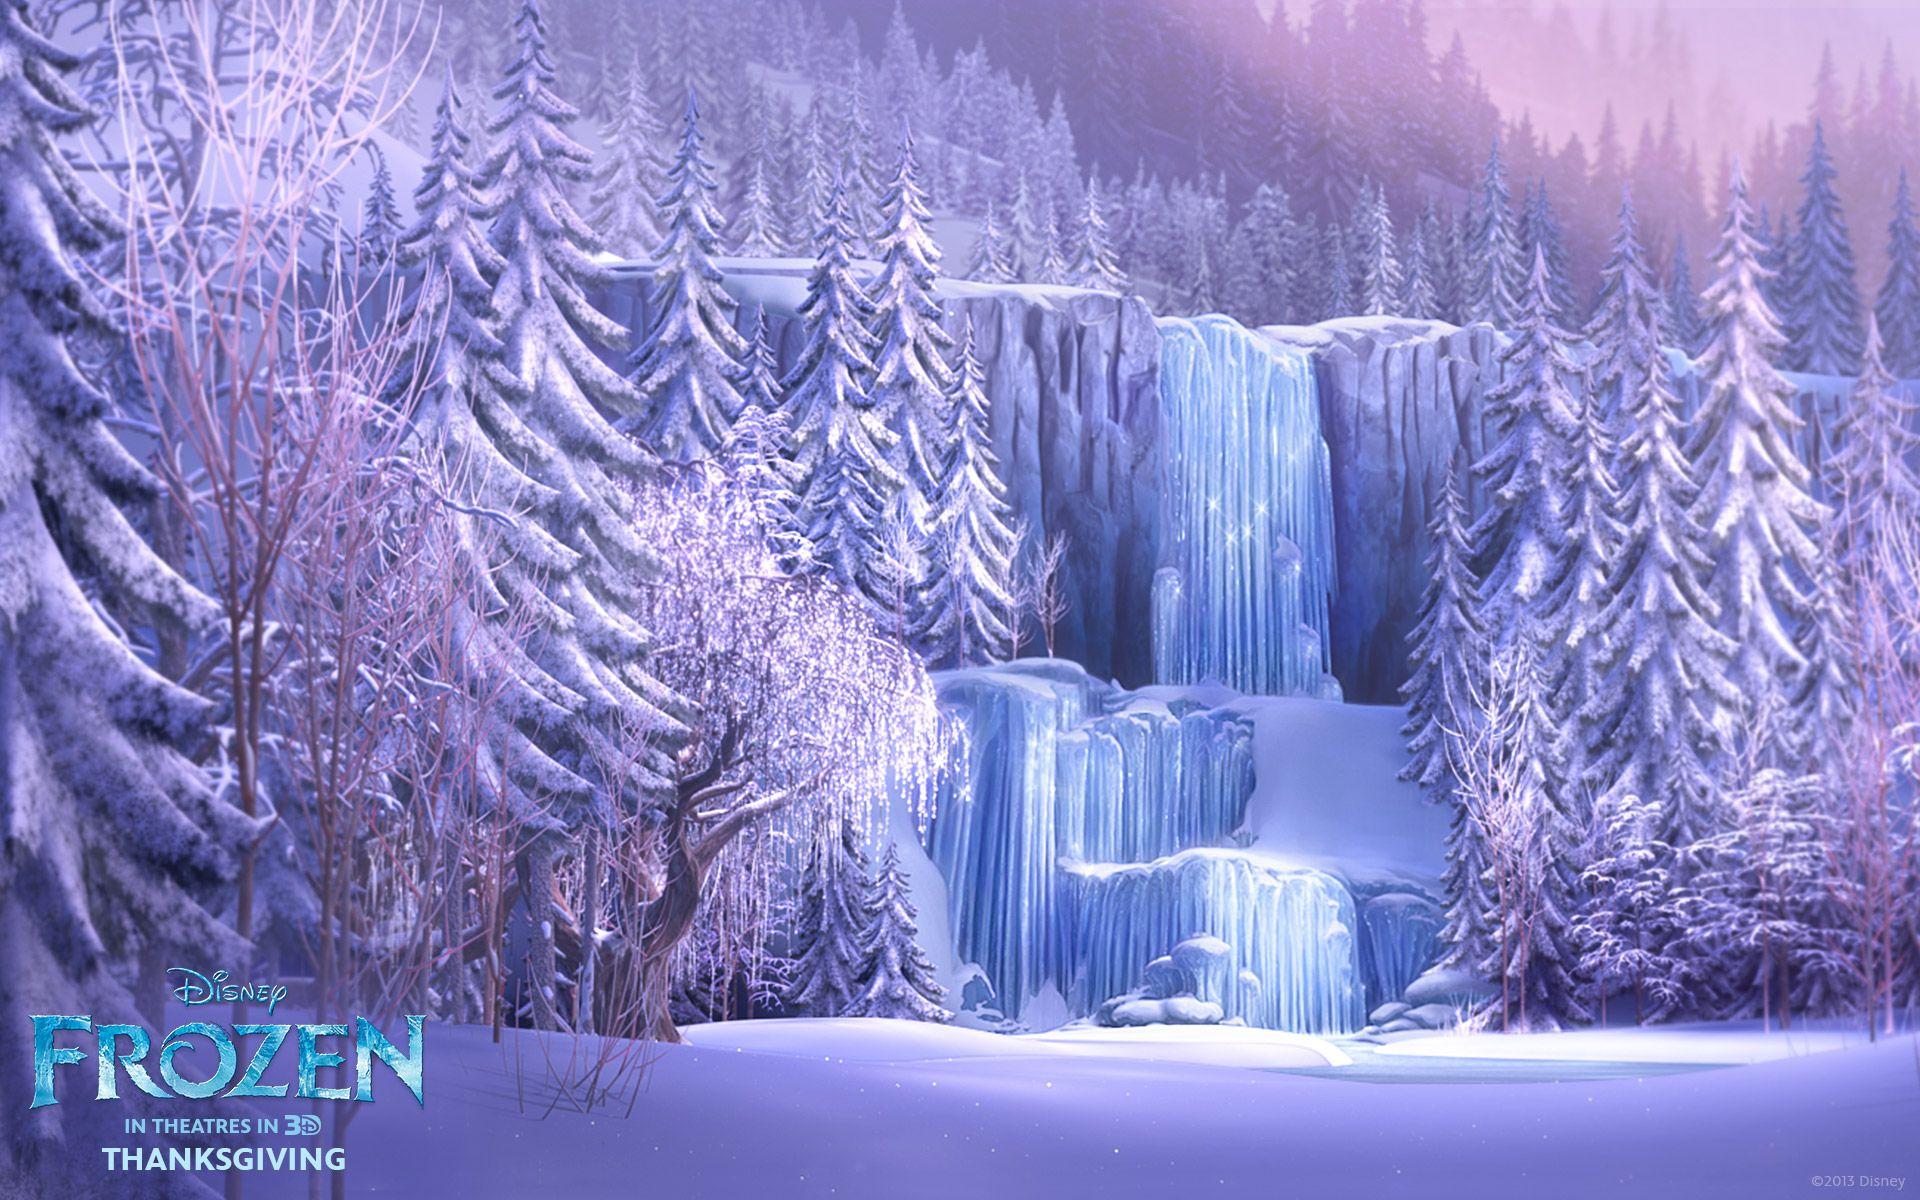 Frozen For Free Wallpapers